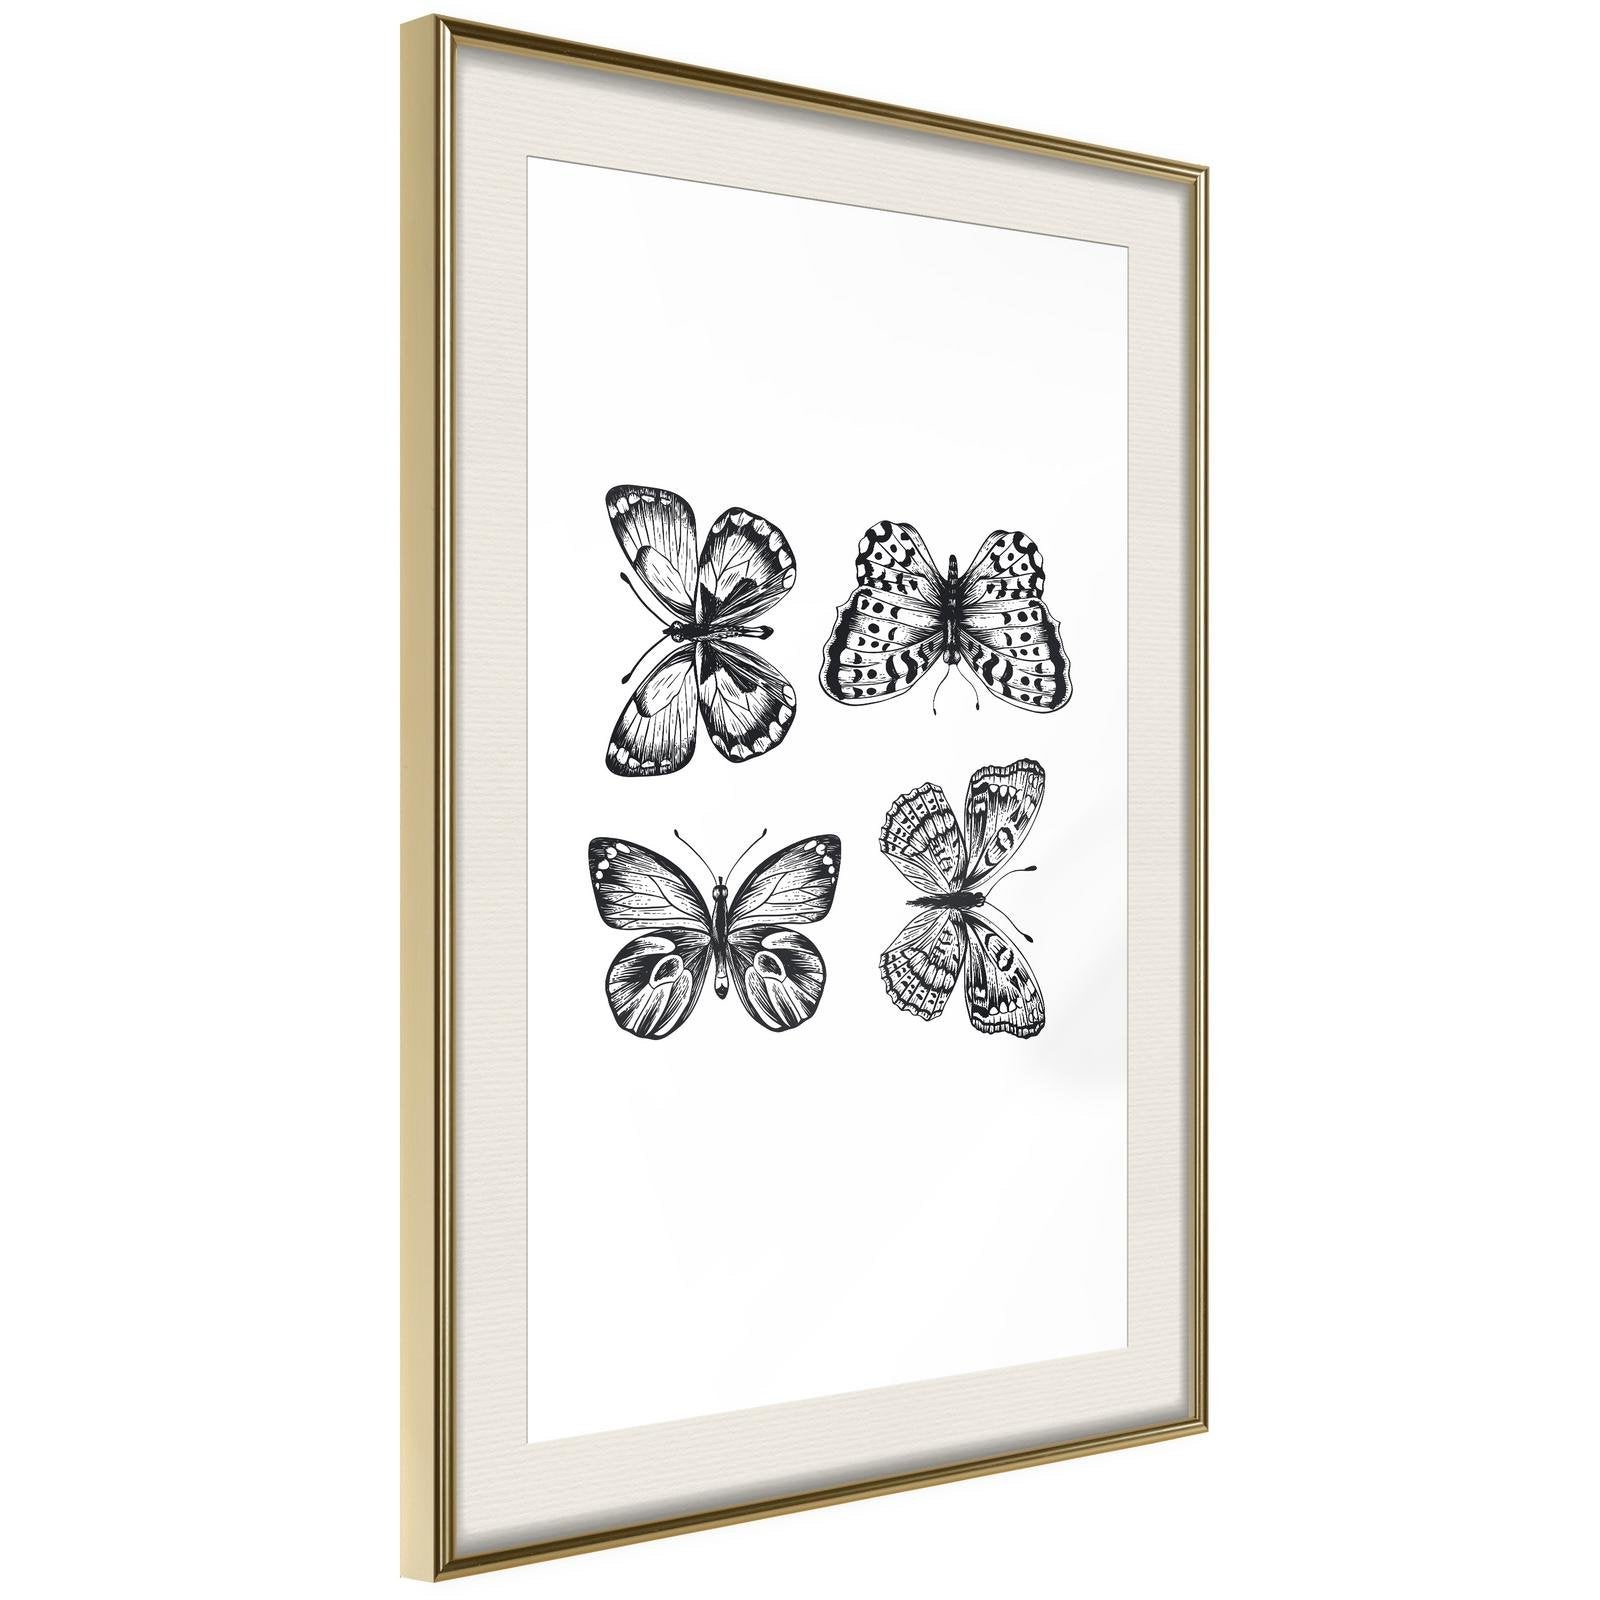 Inramad Poster / Tavla - Butterfly Collection III-Poster Inramad-Artgeist-20x30-Guldram med passepartout-peaceofhome.se